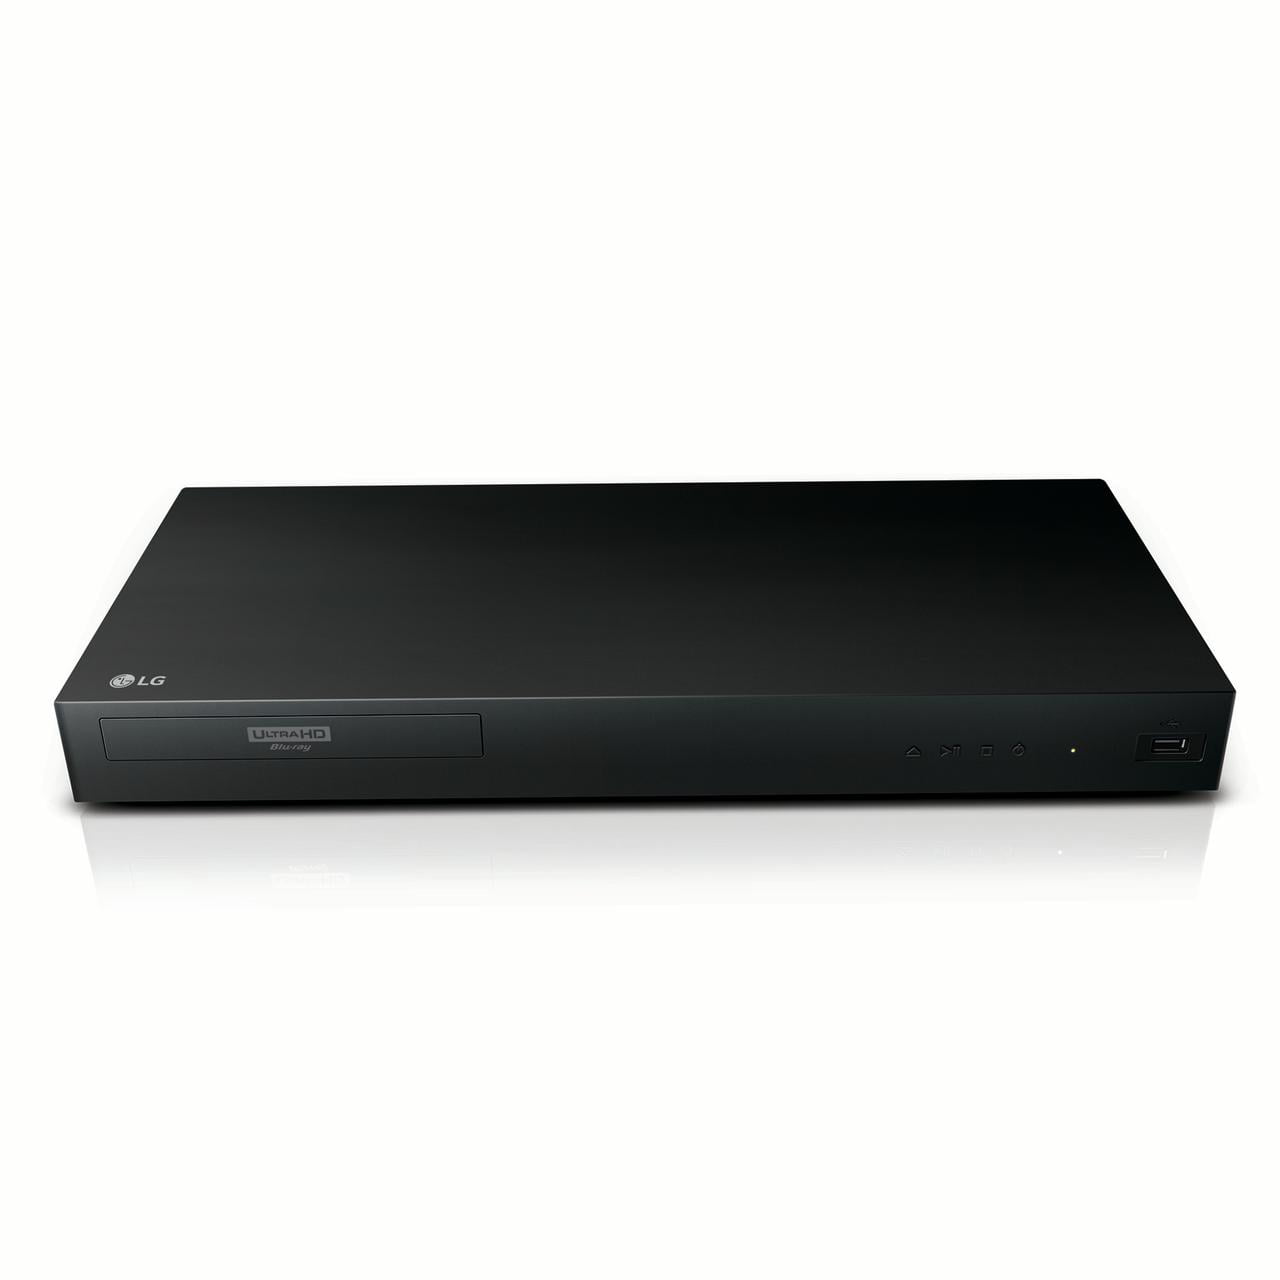 LG 3D Ultra High Definition Blu-Ray 4K Player with Remote Control, HDR  Compatibility, Upconvert DVDs, Ethernet, HDMI, USB Port (Black) - NO WiFi